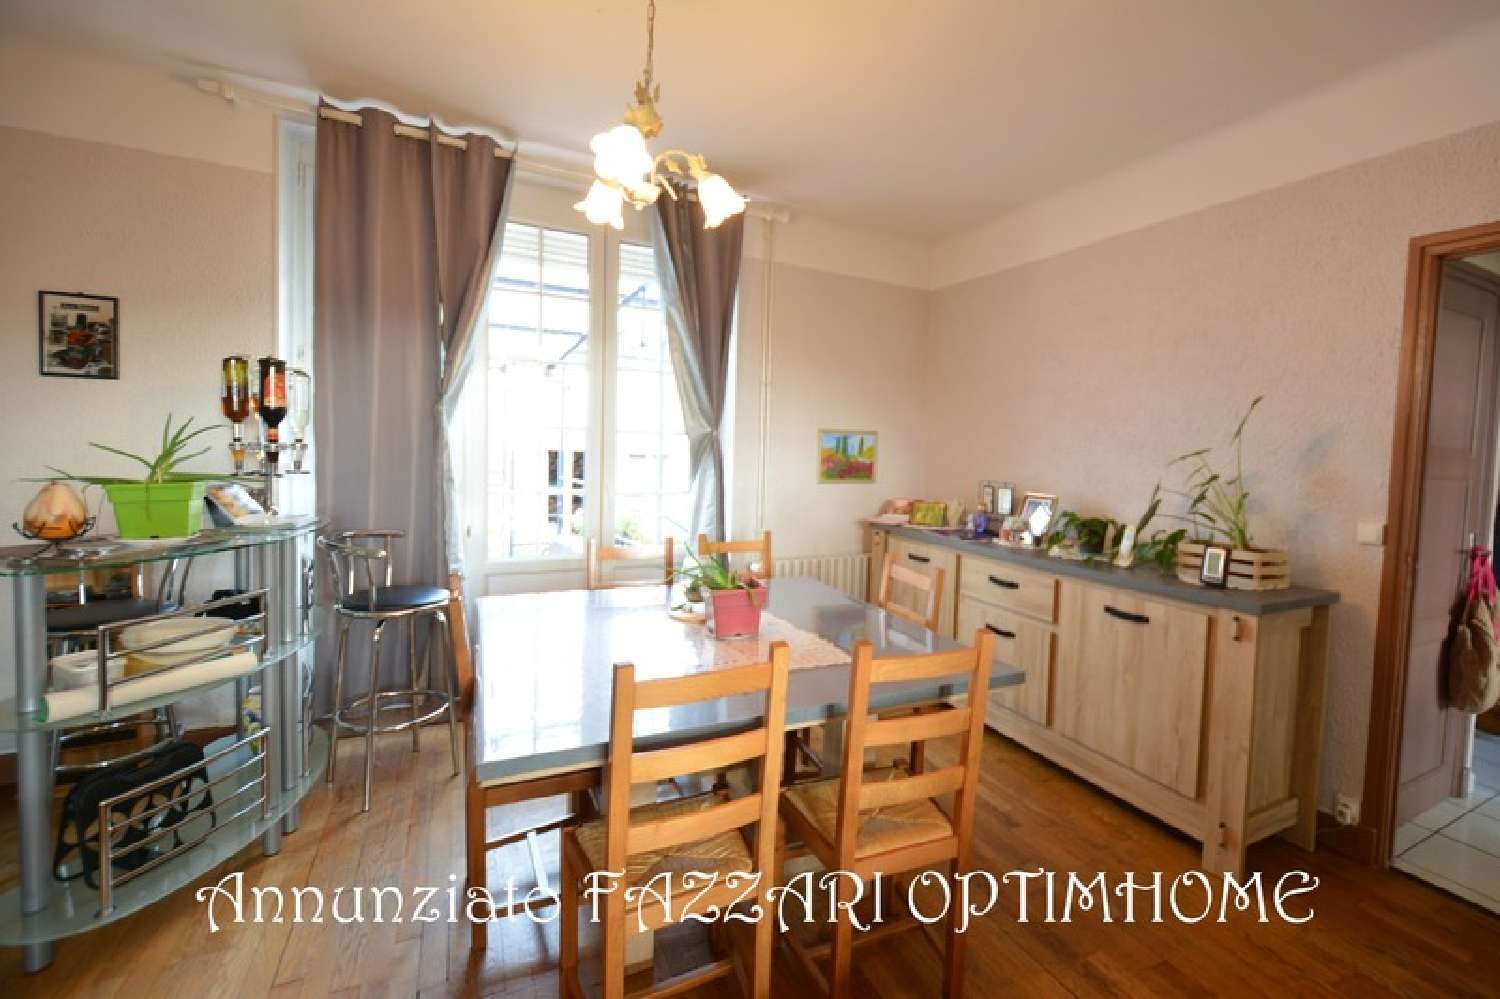  for sale village house Inor Meuse 4